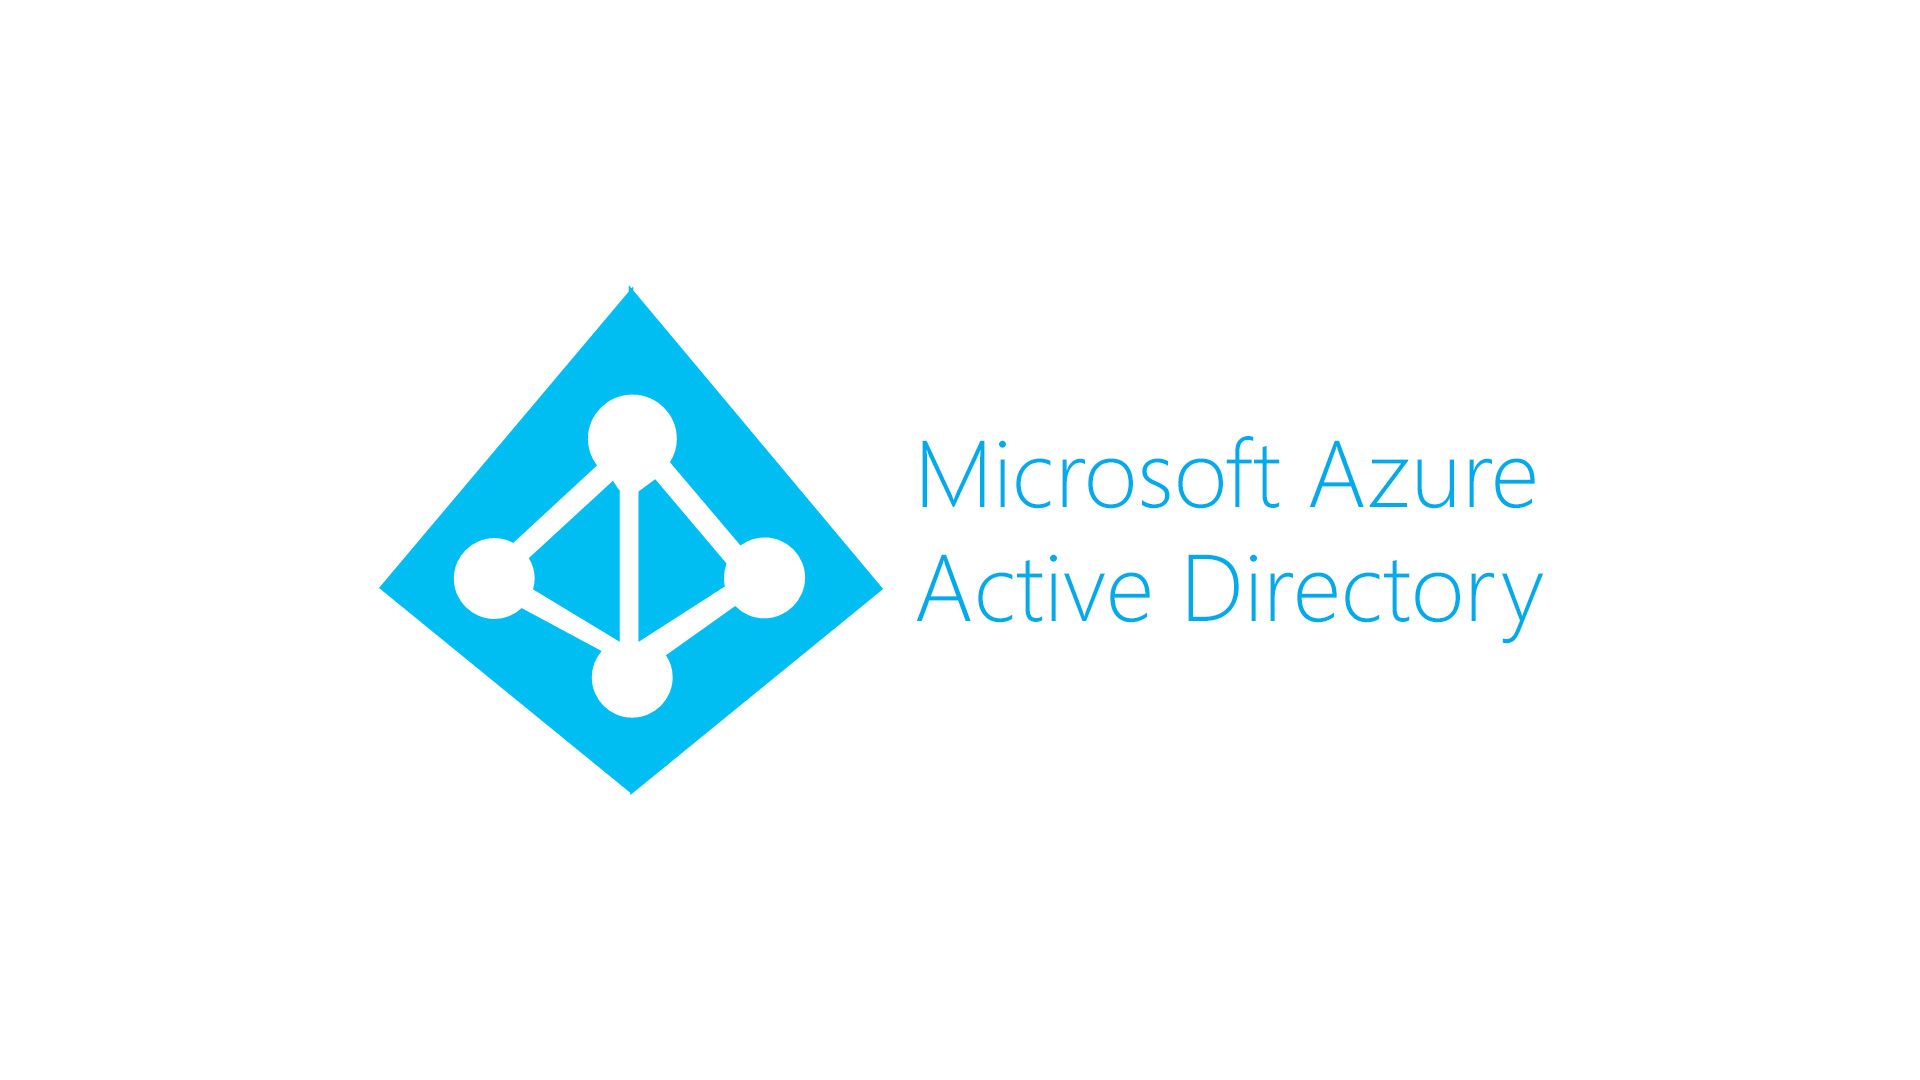 image from Setting up monitoring for Azure AD Applications' secret expiration